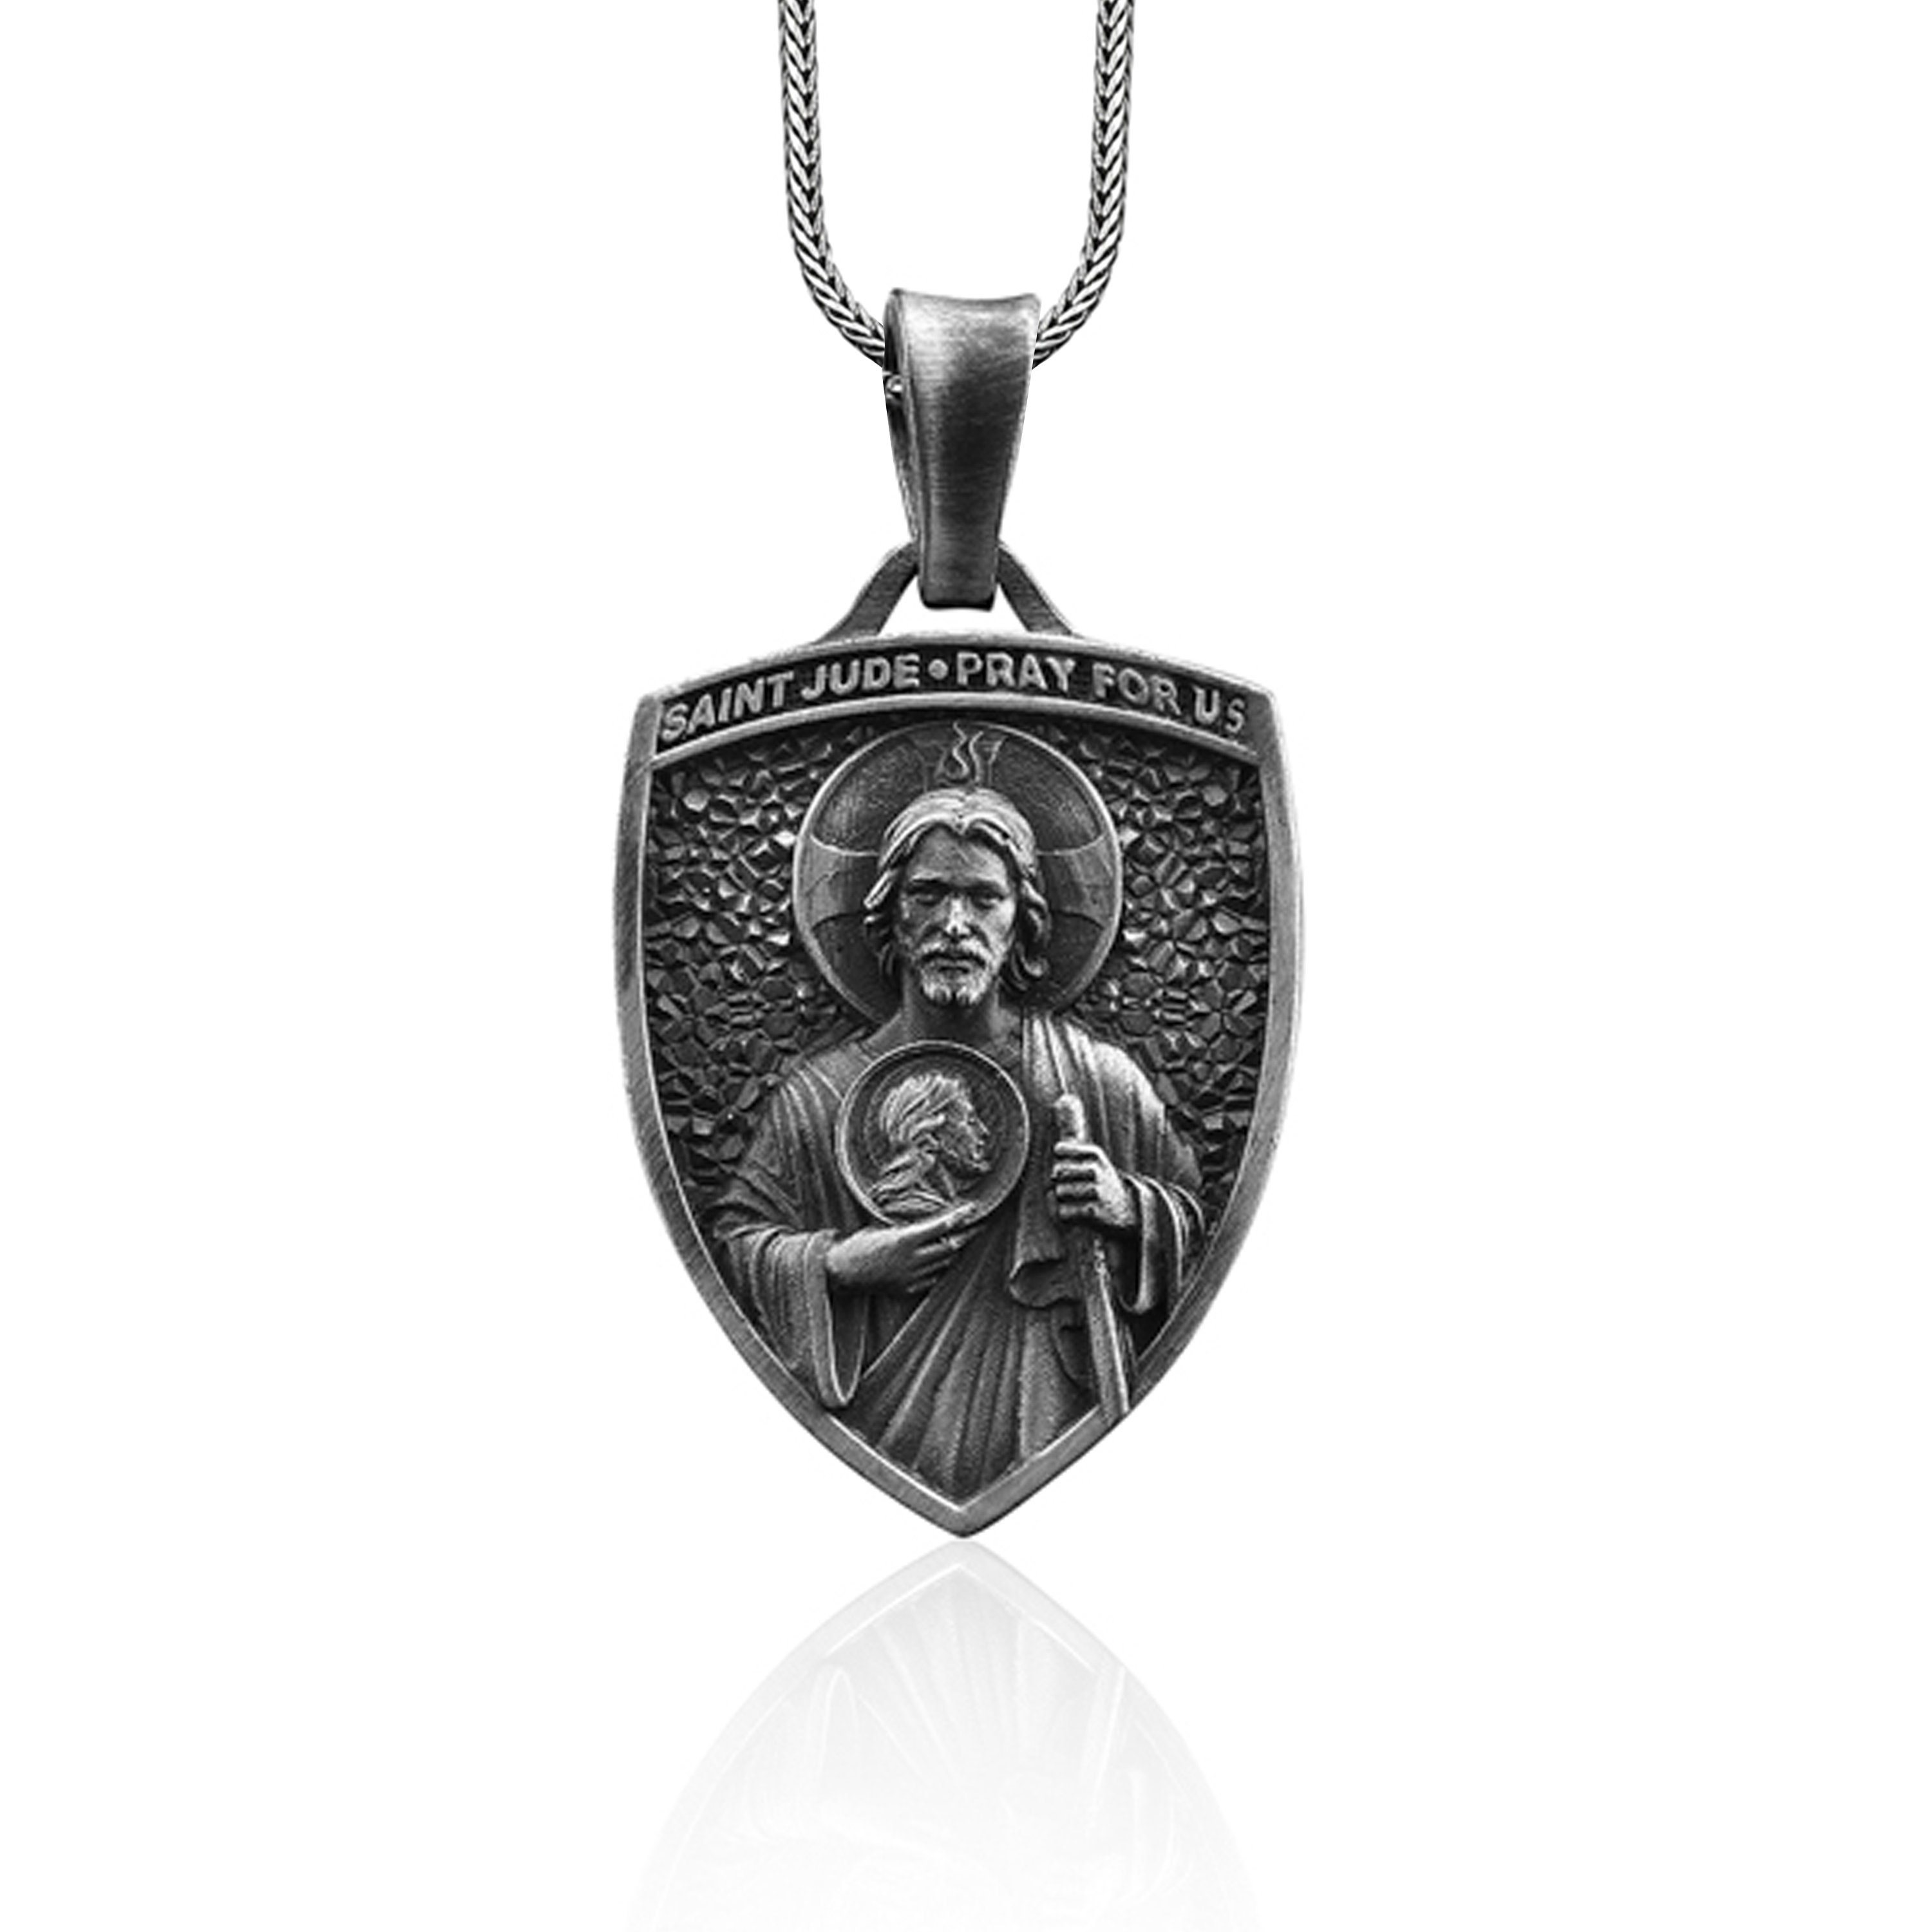 Saint Jude Pendant Chain Necklace, Pray for Us Pendant, Mens Chains, Circle  Necklaces, God Chain Pendants, Gifts for Men, Womens Necklaces 